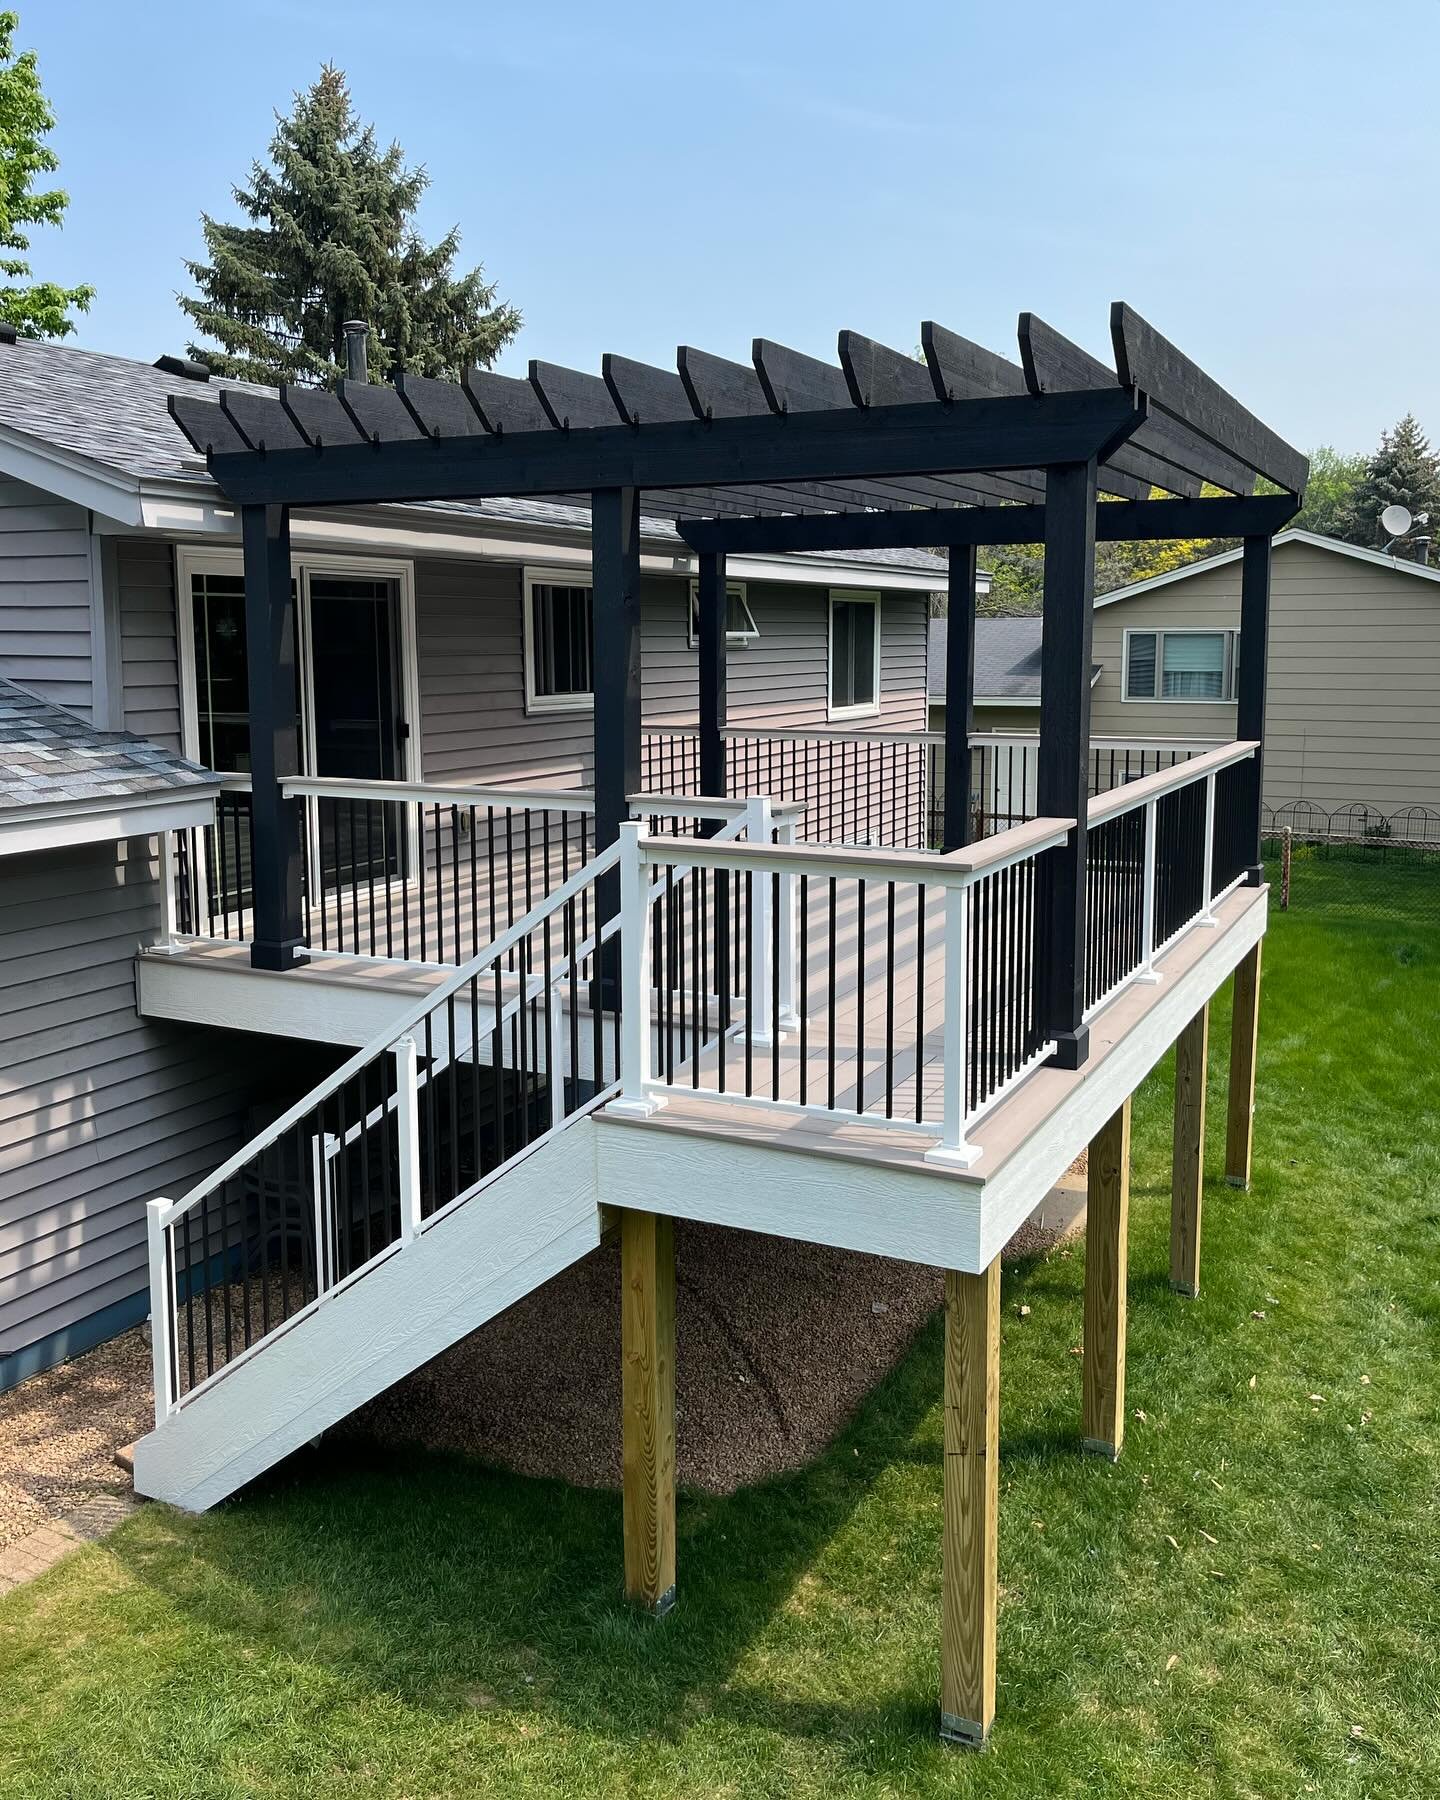 The pergola/deck duo is ready for summer 🌞 This 16x16 deck is &ldquo;decked&rdquo; out with @timbertech Slate Gray decking, @mvainc tuxedo railing, drink rail, double picture frame border, and the of course&hellip; THE PERGOLA! 

Let us know what yo